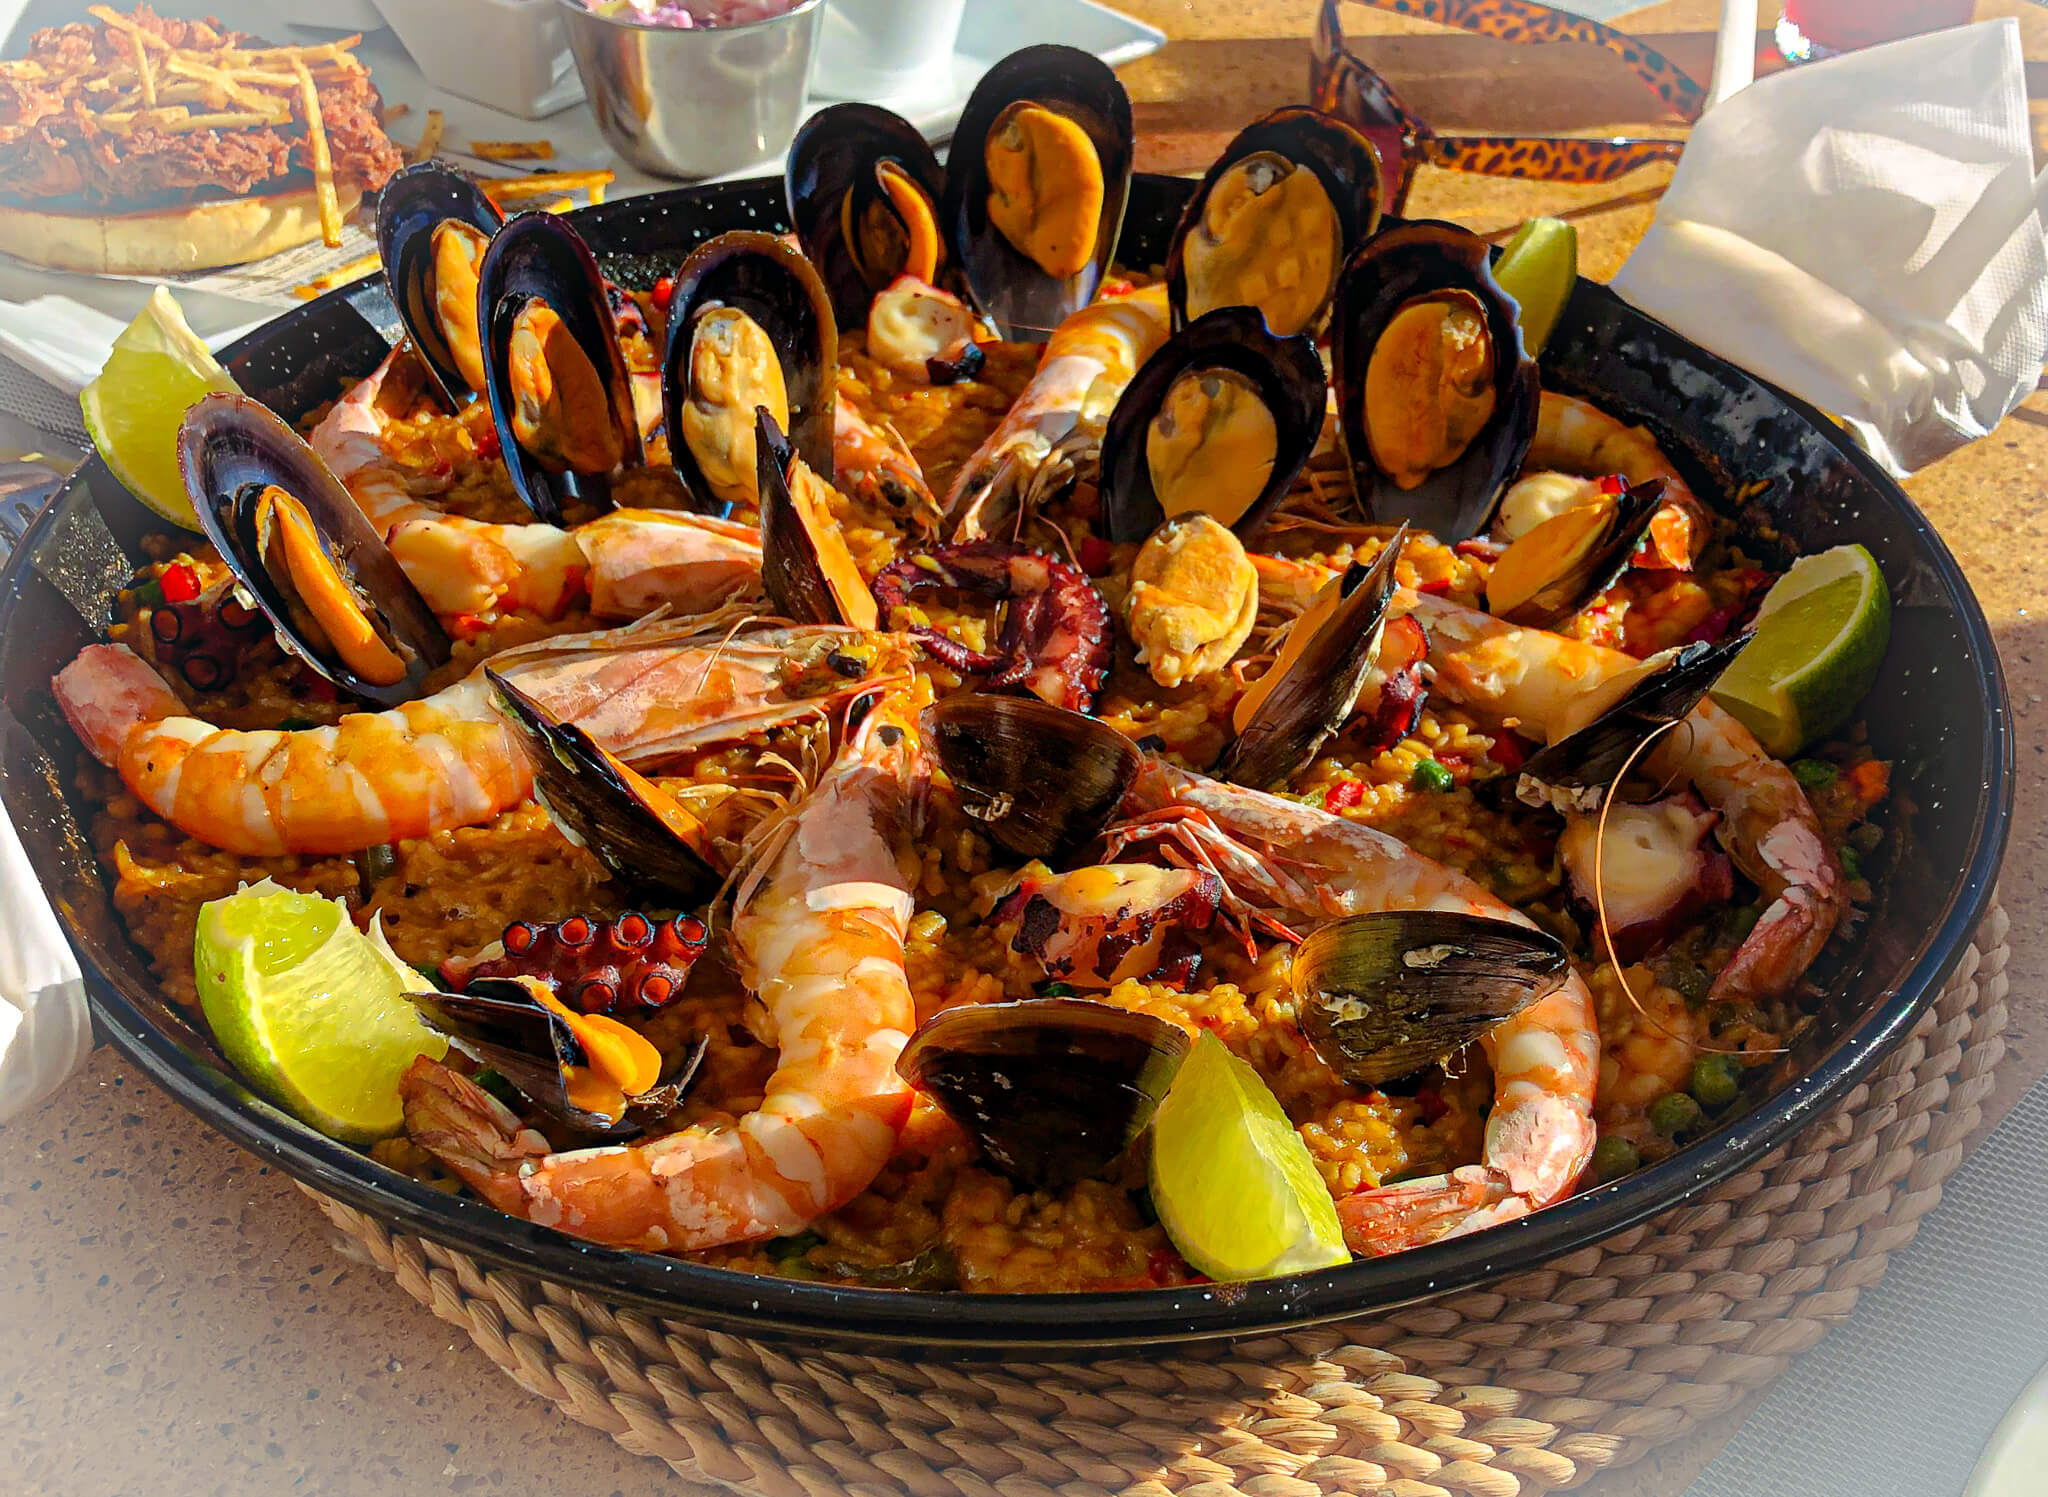 Paella Large Black Dish with prawns, mussels, rice and lemons inside. Background blurred. Marbella, Spain